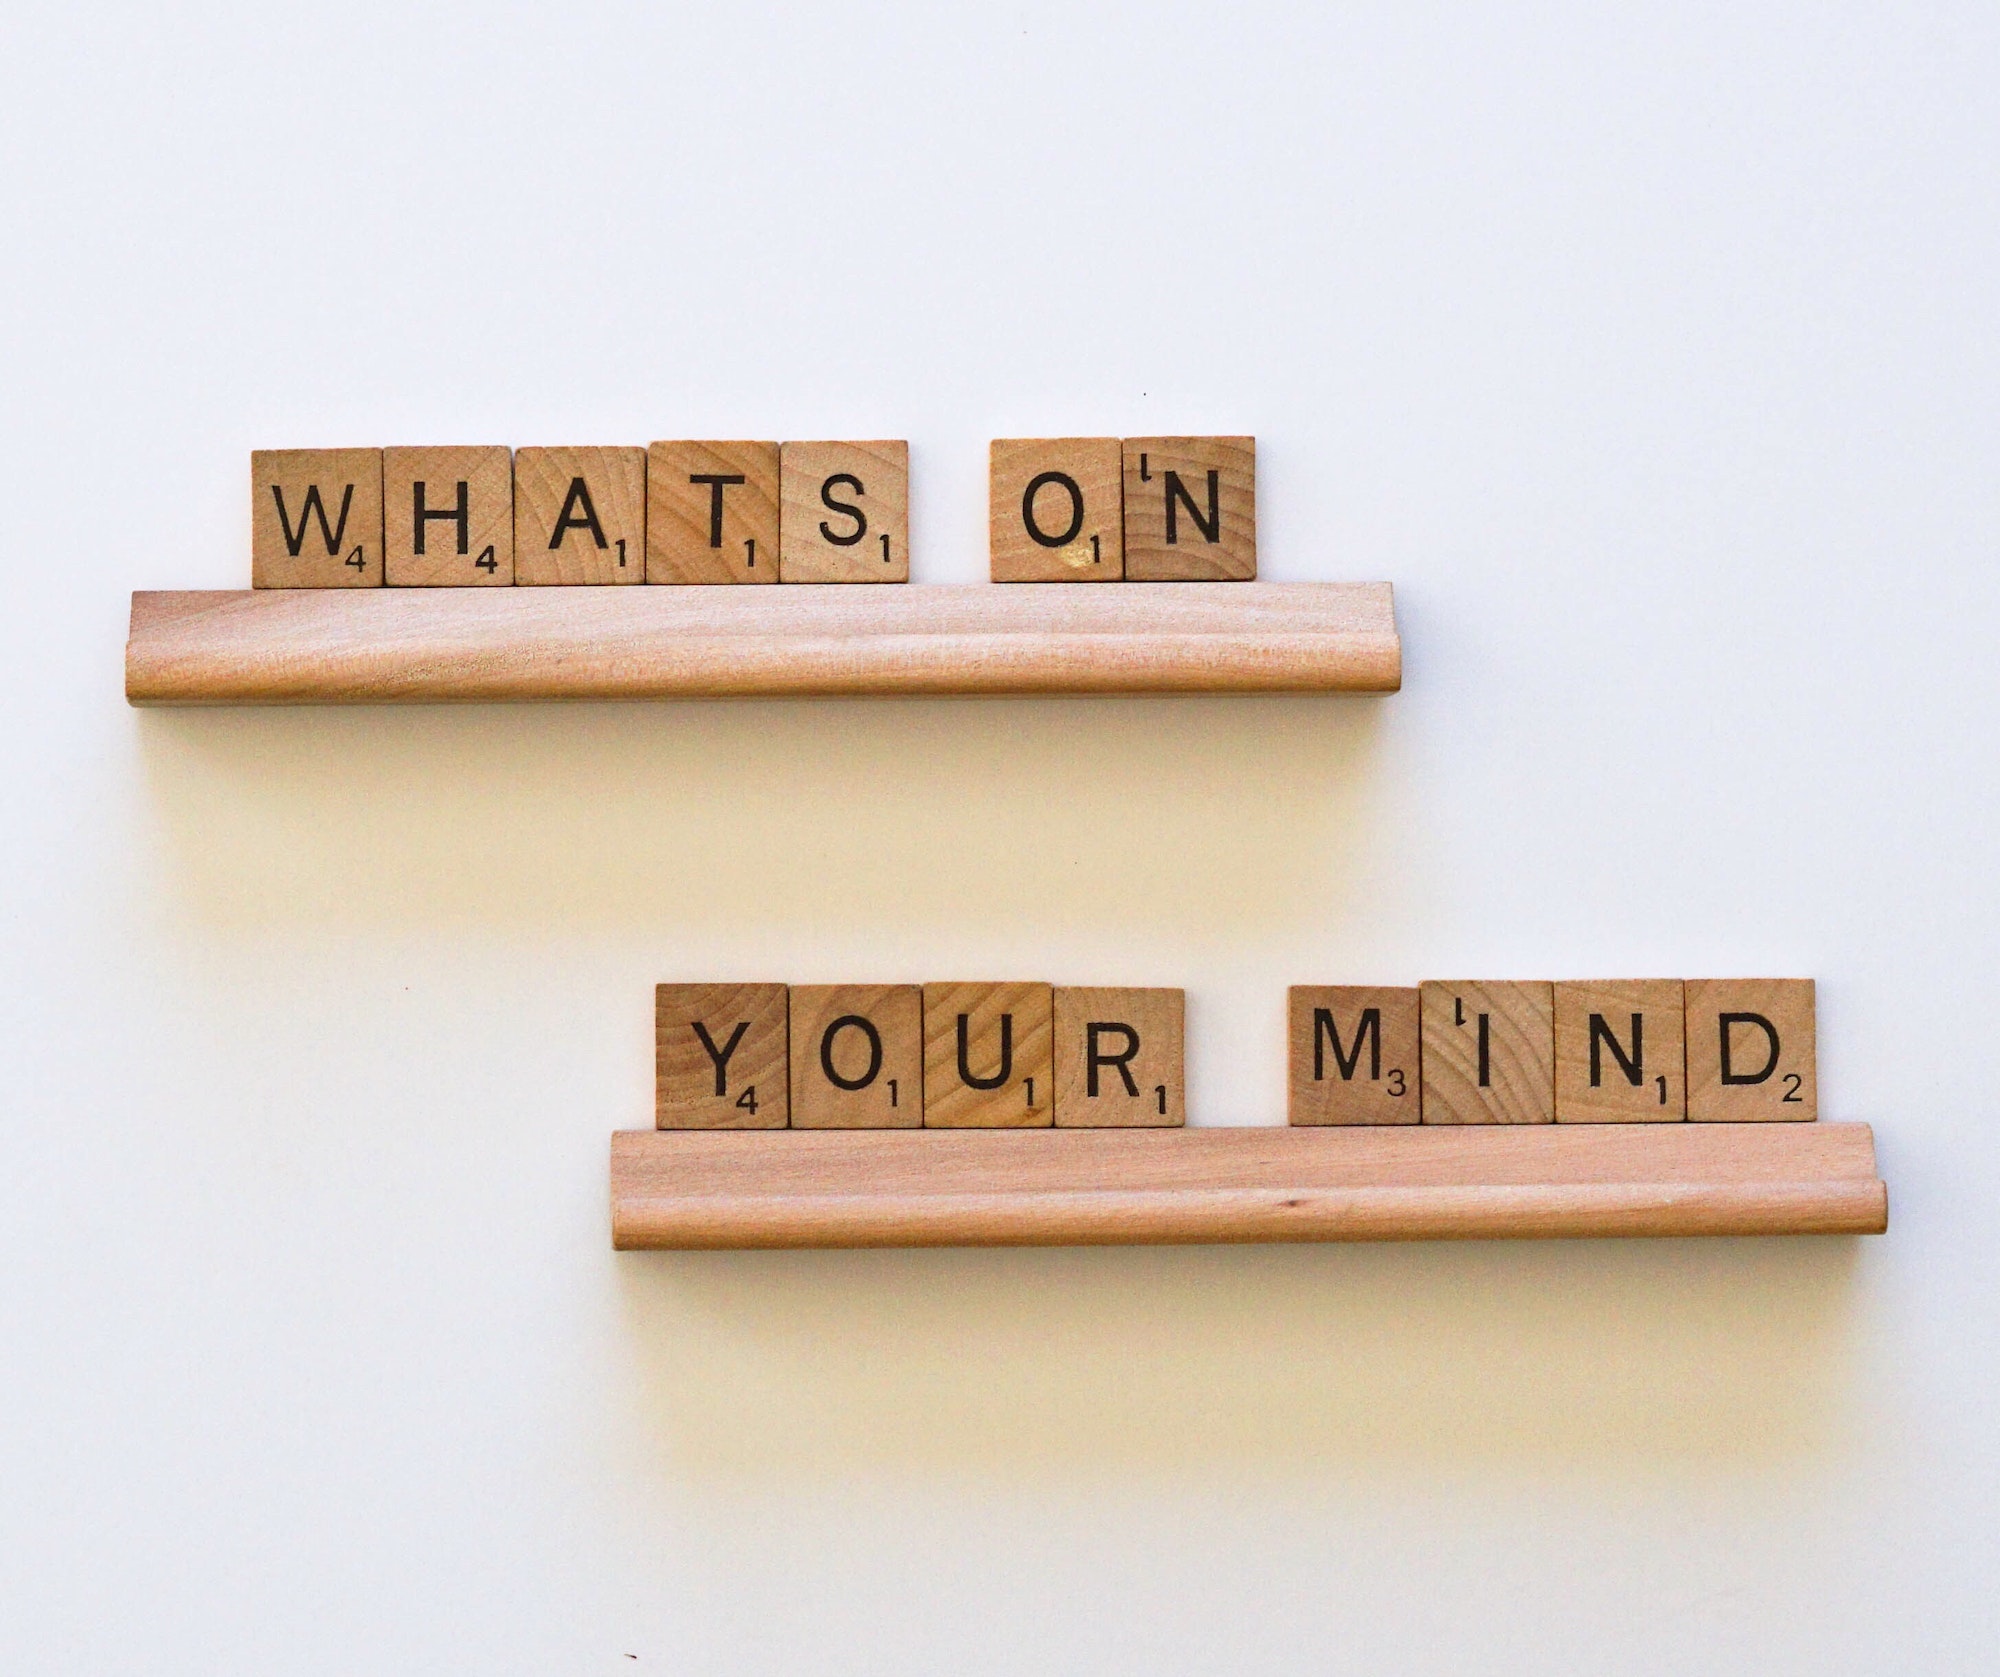 What’s on your mind? mindful at work and home